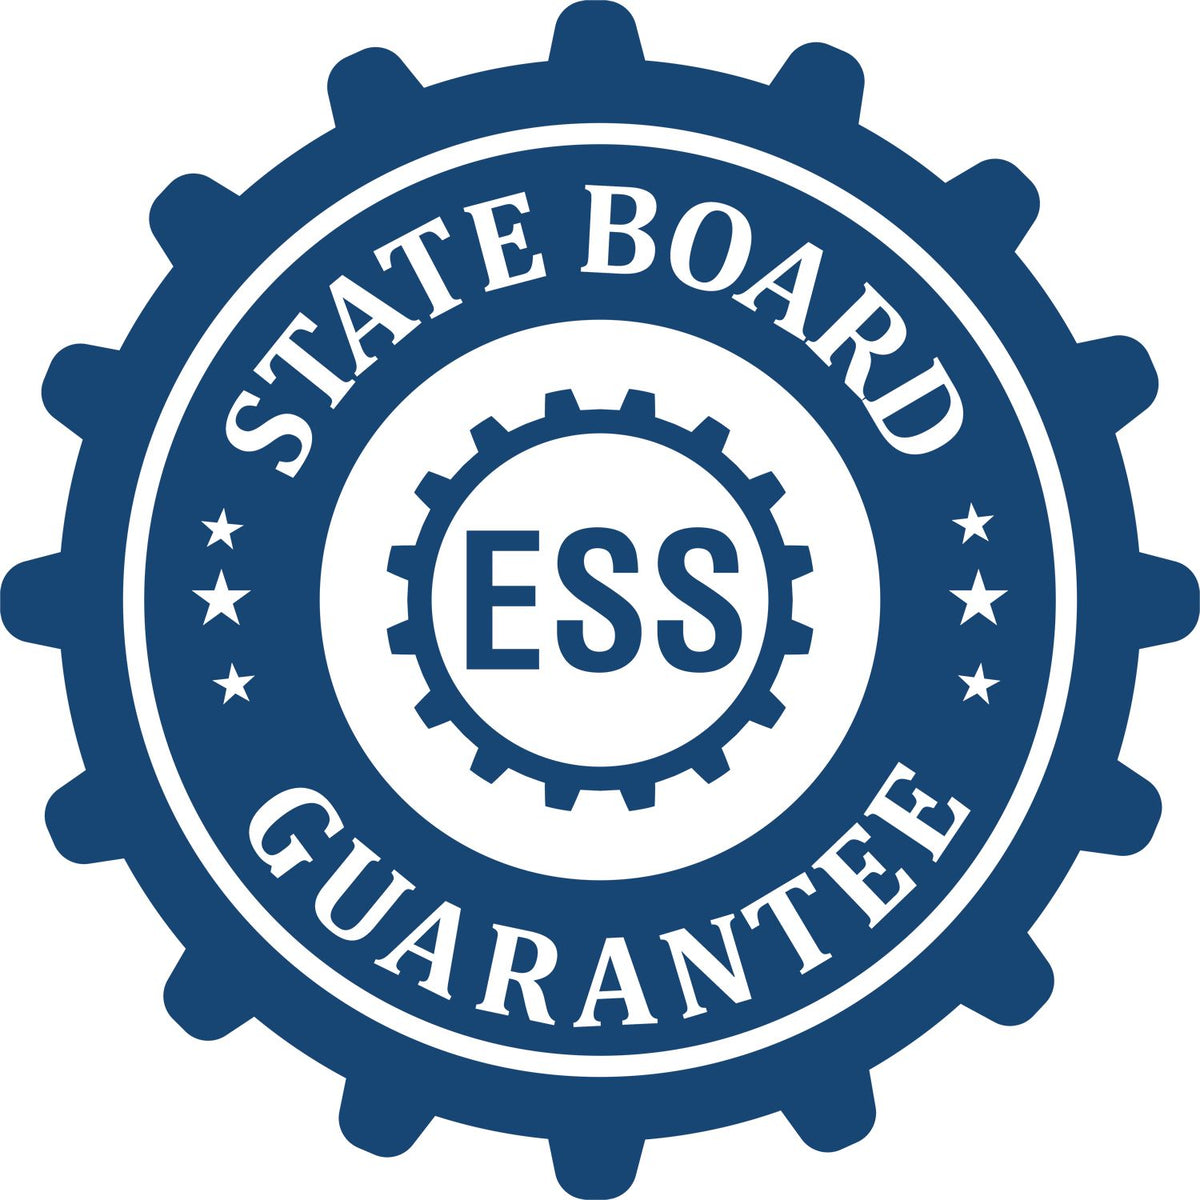 An emblem in a gear shape illustrating a state board guarantee for the Gift Rhode Island Landscape Architect Seal